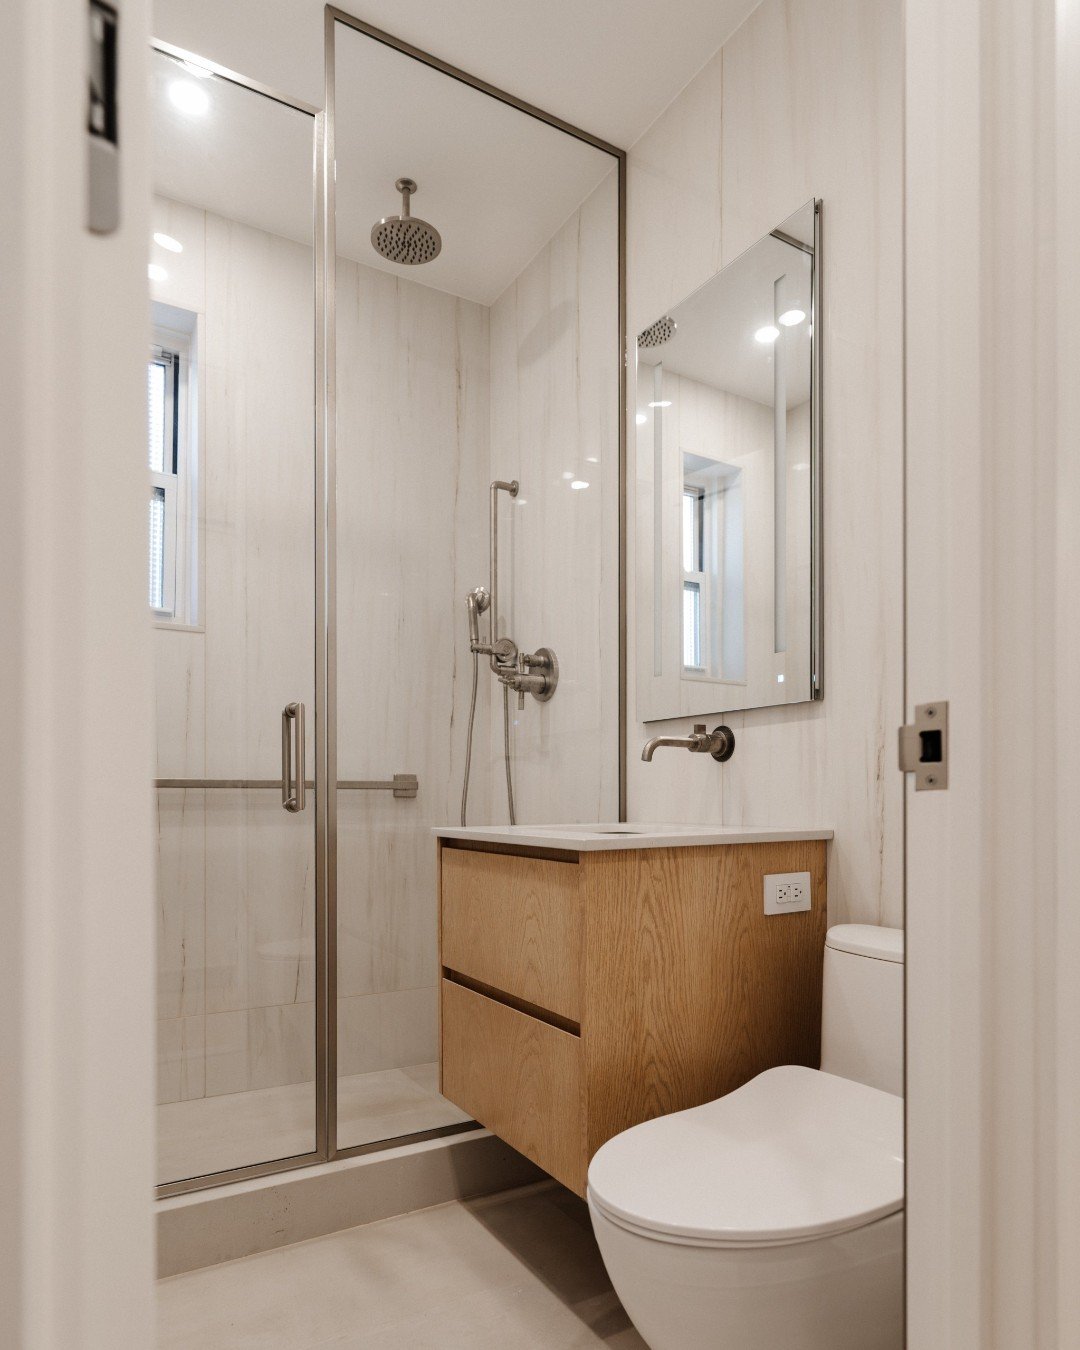 In this bathroom design, we've seamlessly integrated all our favorite design elements and top-notch brands. From the expansive wall tiles to the sleek Robern medicine cabinet, the exquisite Brizio fixtures to the stylish framed shower glass surround,